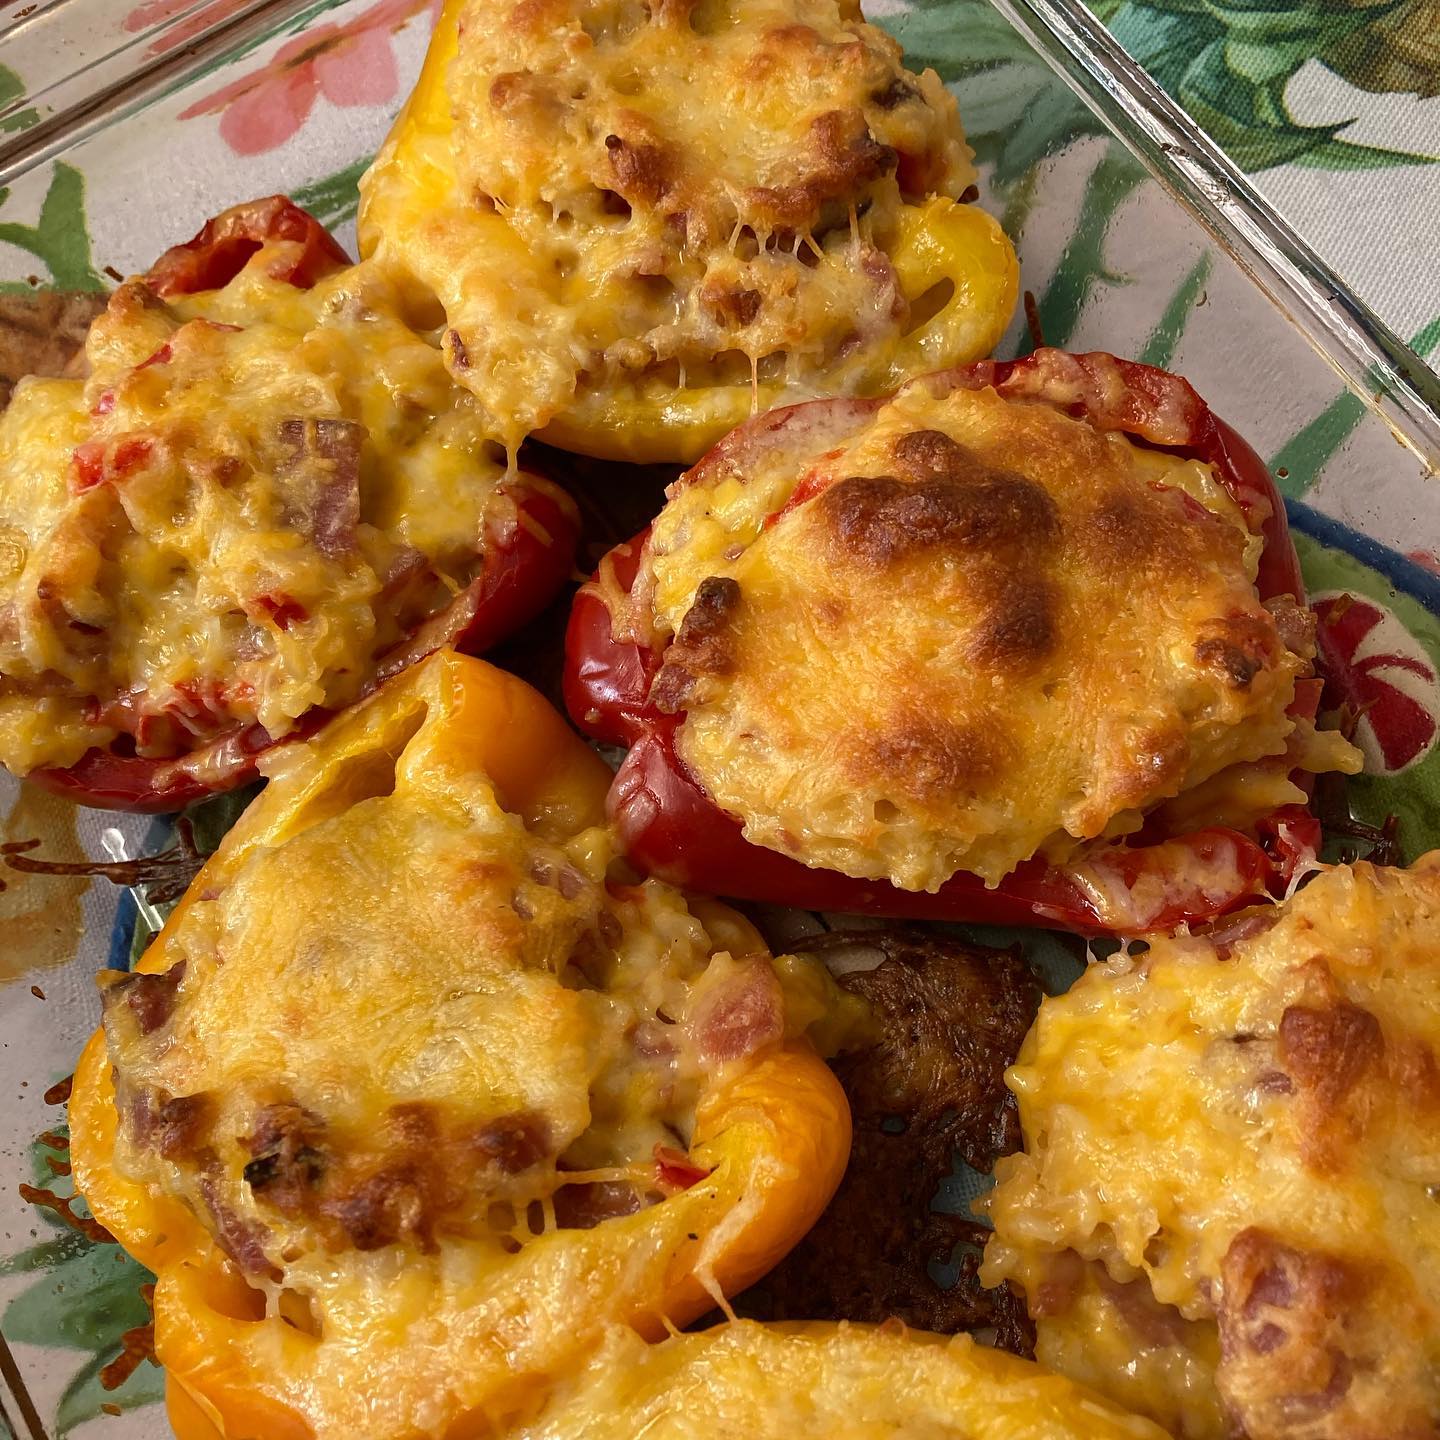 I could live off stuffed peppers. I really do believe this to be fact. 
.
.
These babies are stuffed with Ham and Cheese....like A LOT of ham and cheese. So good. 
.
.
.
.
Search “Booyah Buffet Ham and Cheese Stuffed Peppers” for the recipe—or hit the link in my bio and go to the blog index and find the recipe from there.
.
.
.
.
.
.
.
.
#stuffedpeppers #feedfeed #f52grams #thekitchn #foodblogger #whatsonmyplate #getinmybelly #eatrealfood #goodeats #foodblogeats #igfoodies #foodphotography #makeitdelicious #igeats #wecook #easyrecipes #tastyaf #imsomartha #blackfoodie #blackfoodbloggers